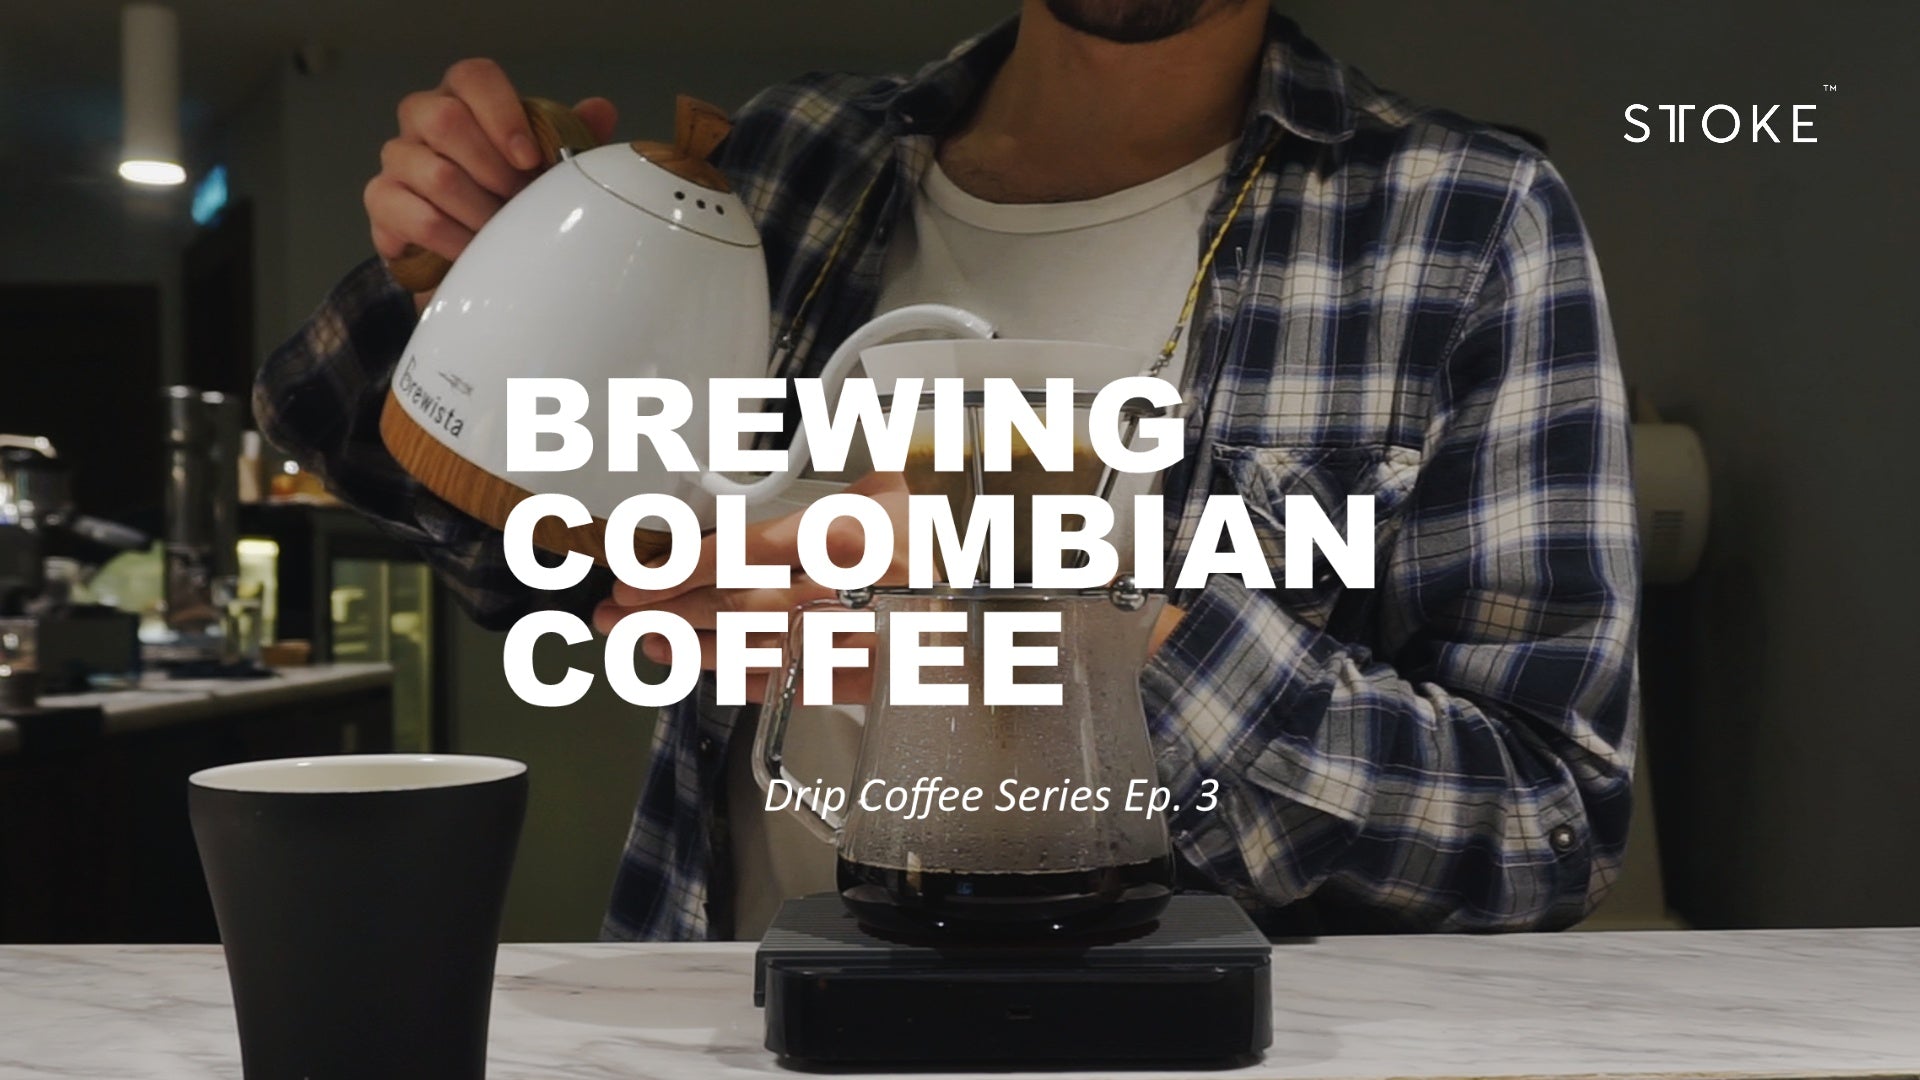 Drip Coffee Series EP 3 | Brewing Colombian Coffee